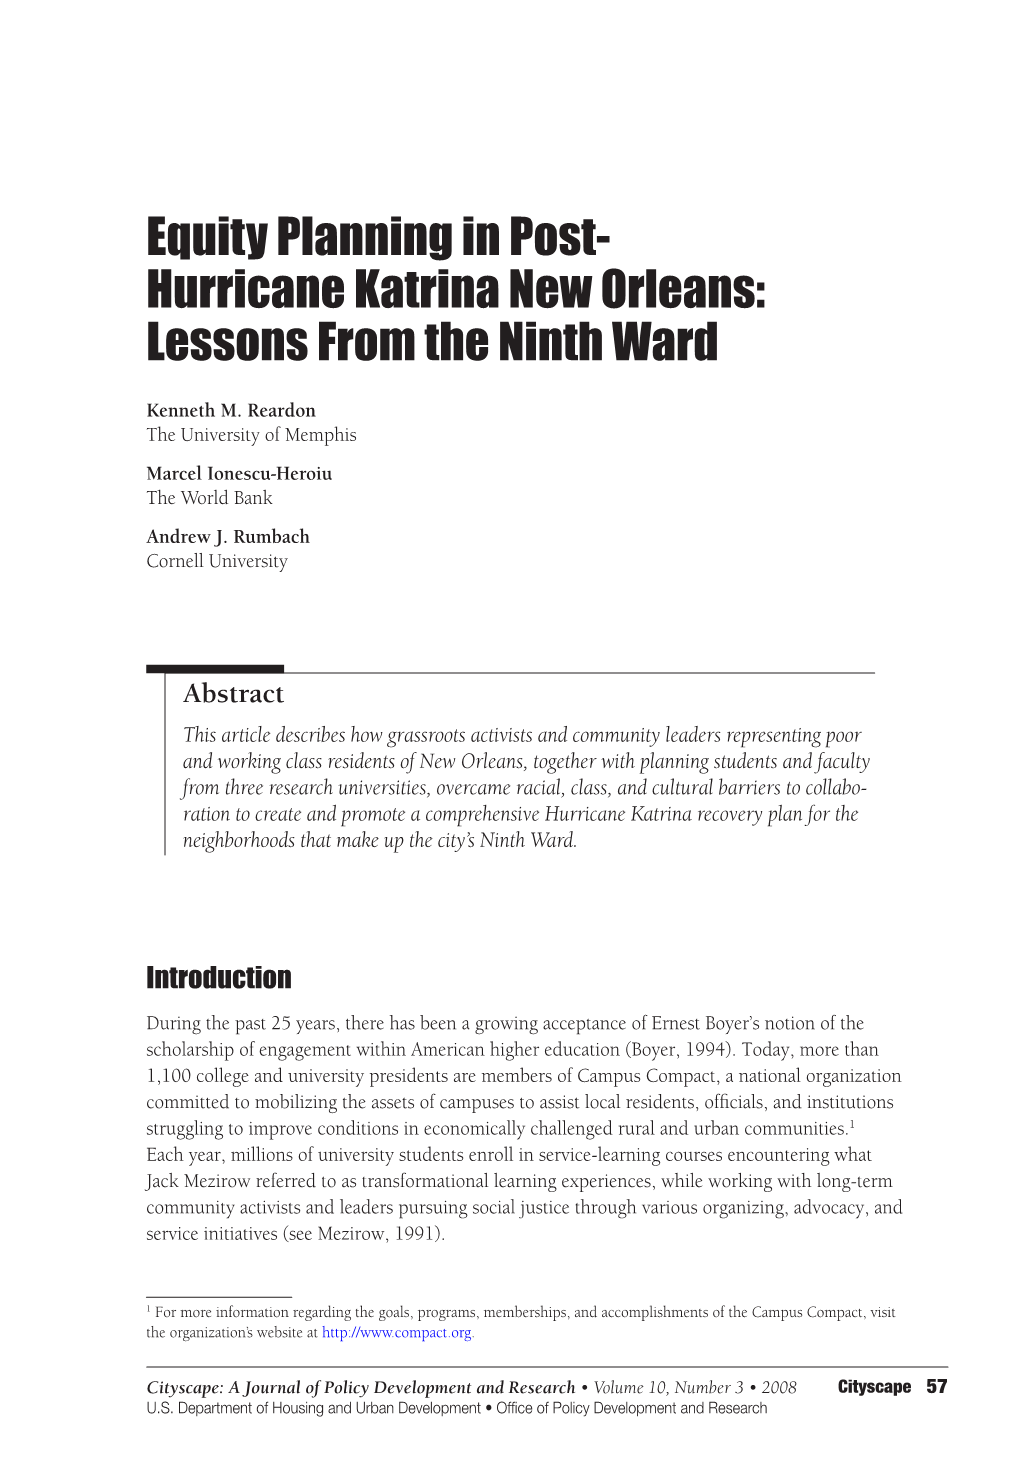 Equity Planning in Post-Hurricane Katrina New Orleans: Lessons from the Ninth Ward